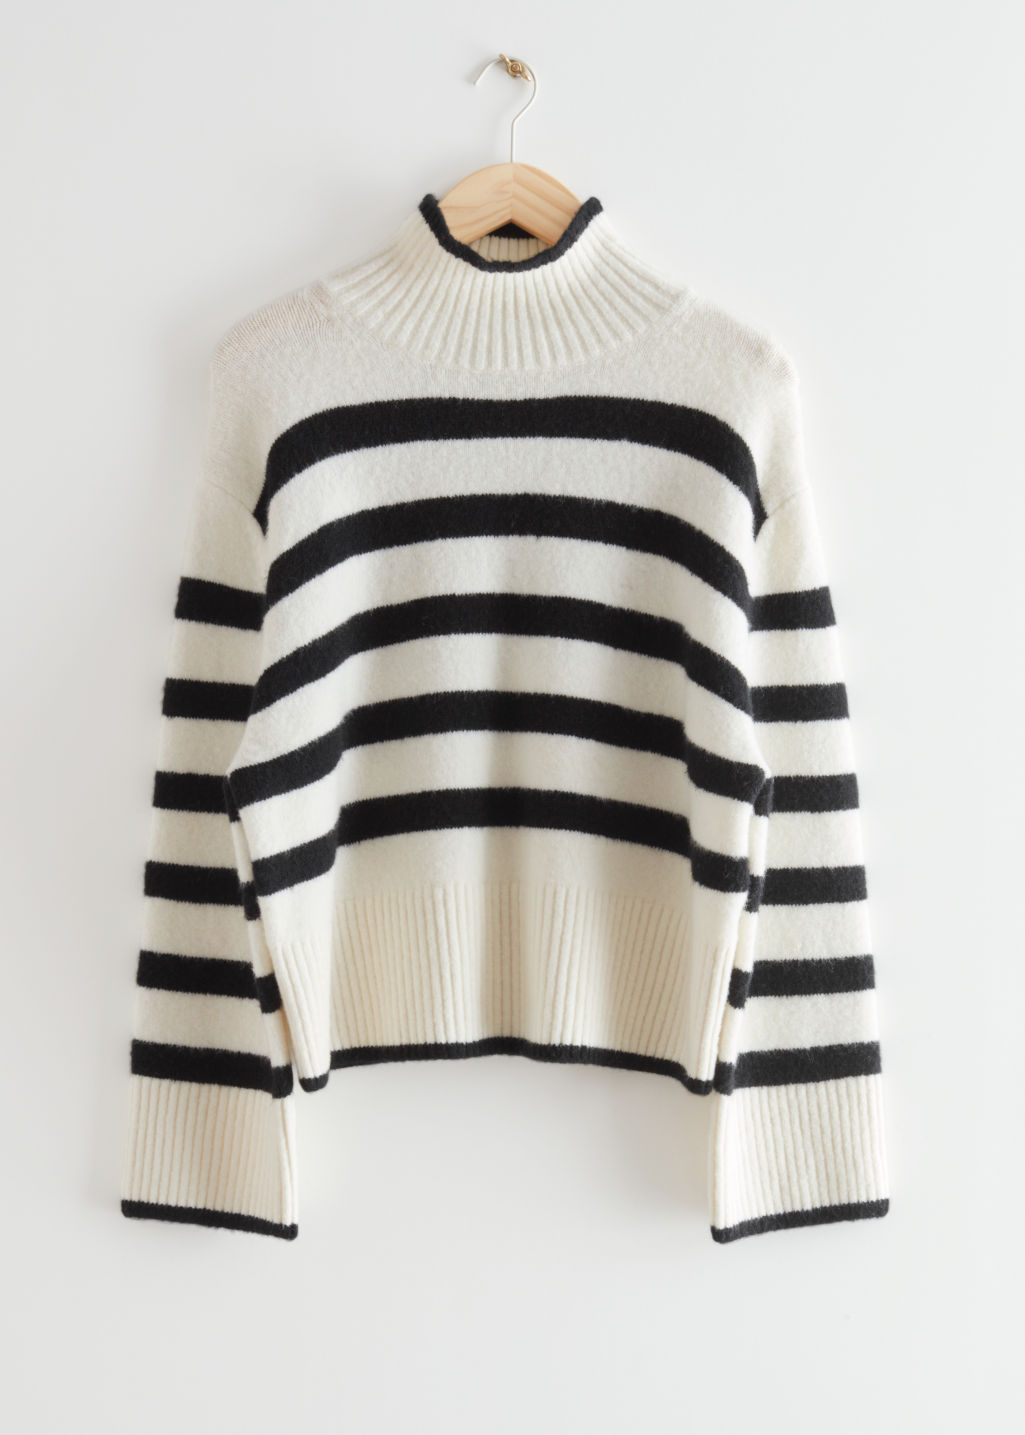 & Other Stories Striped Wool Knit Sweater